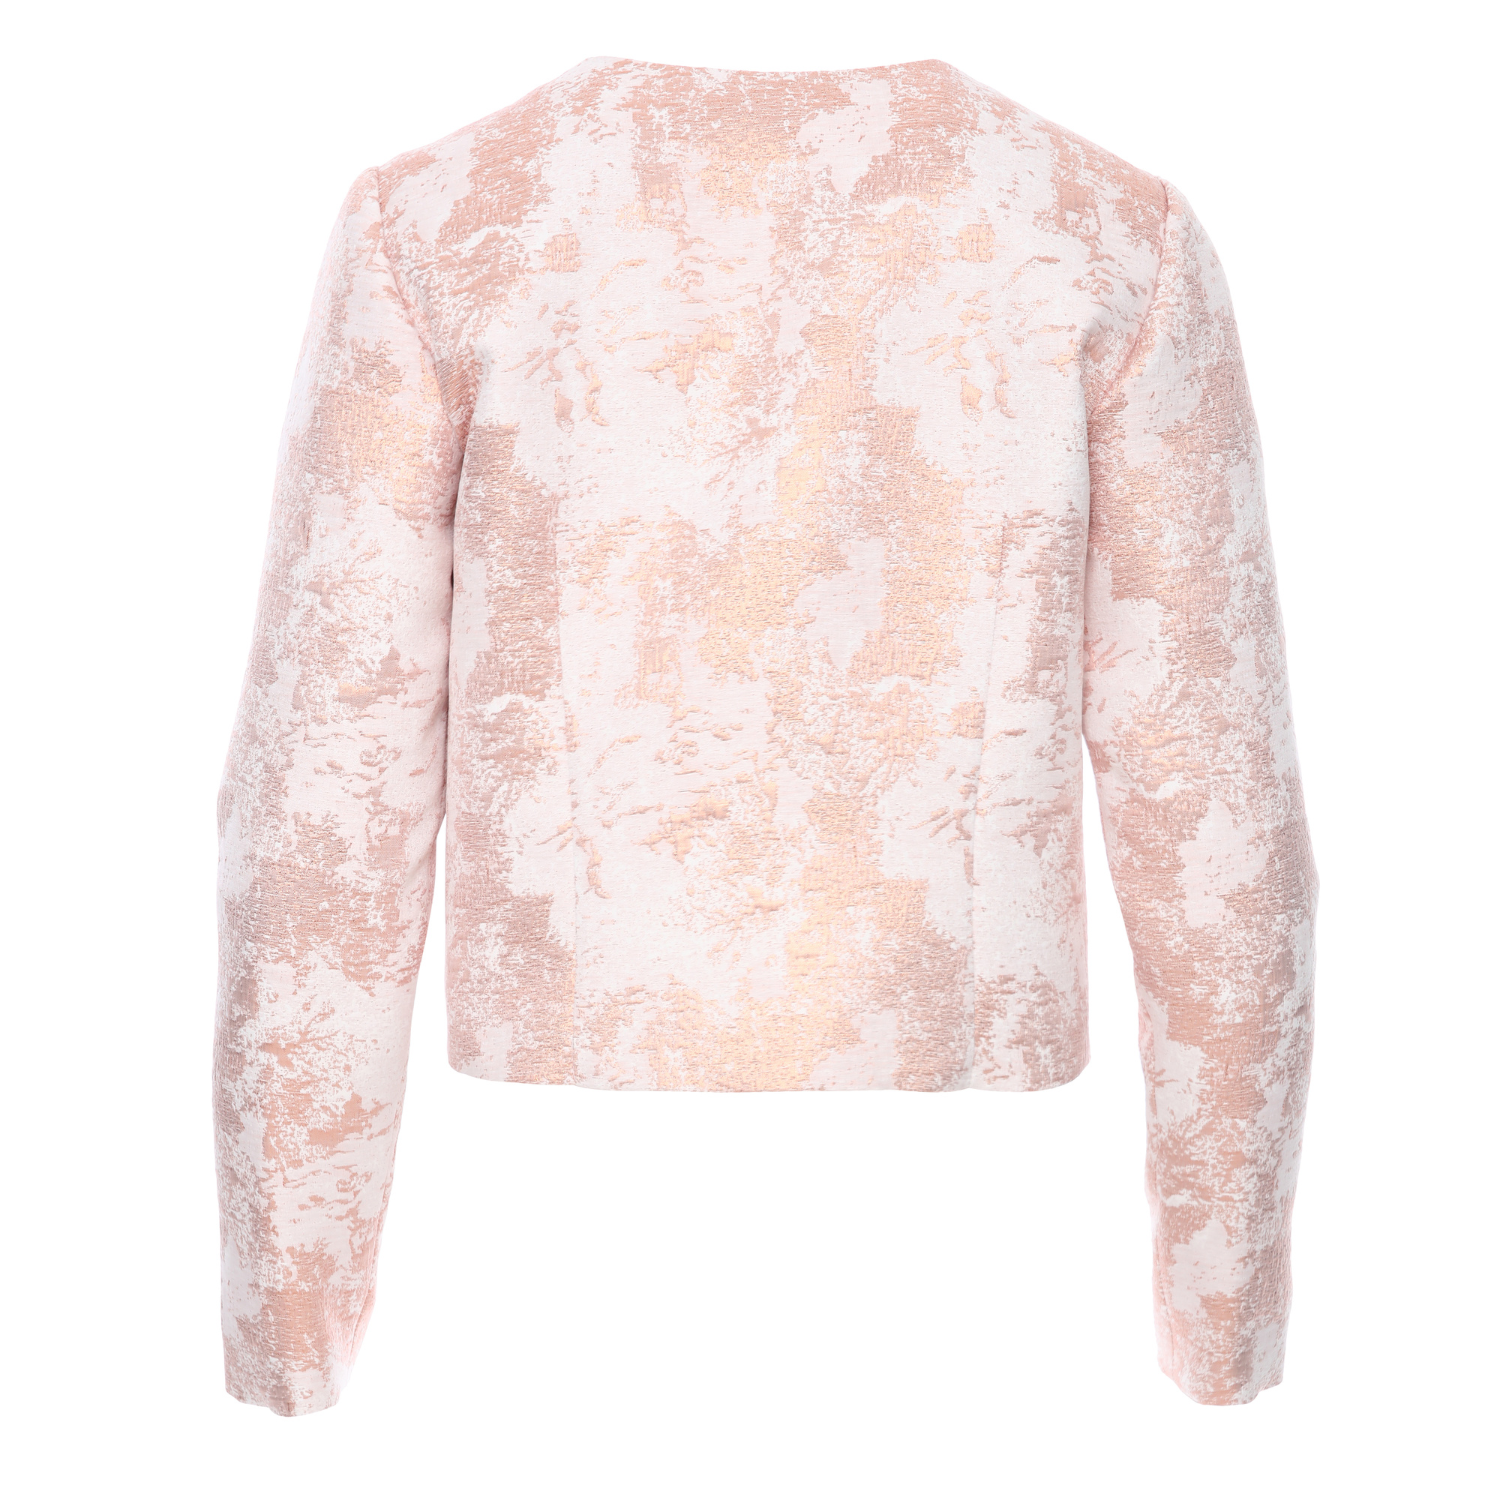 NOUR CLASSIC CROPPED BLAZER IN COSMETIC ROSE GOLD BROCADE